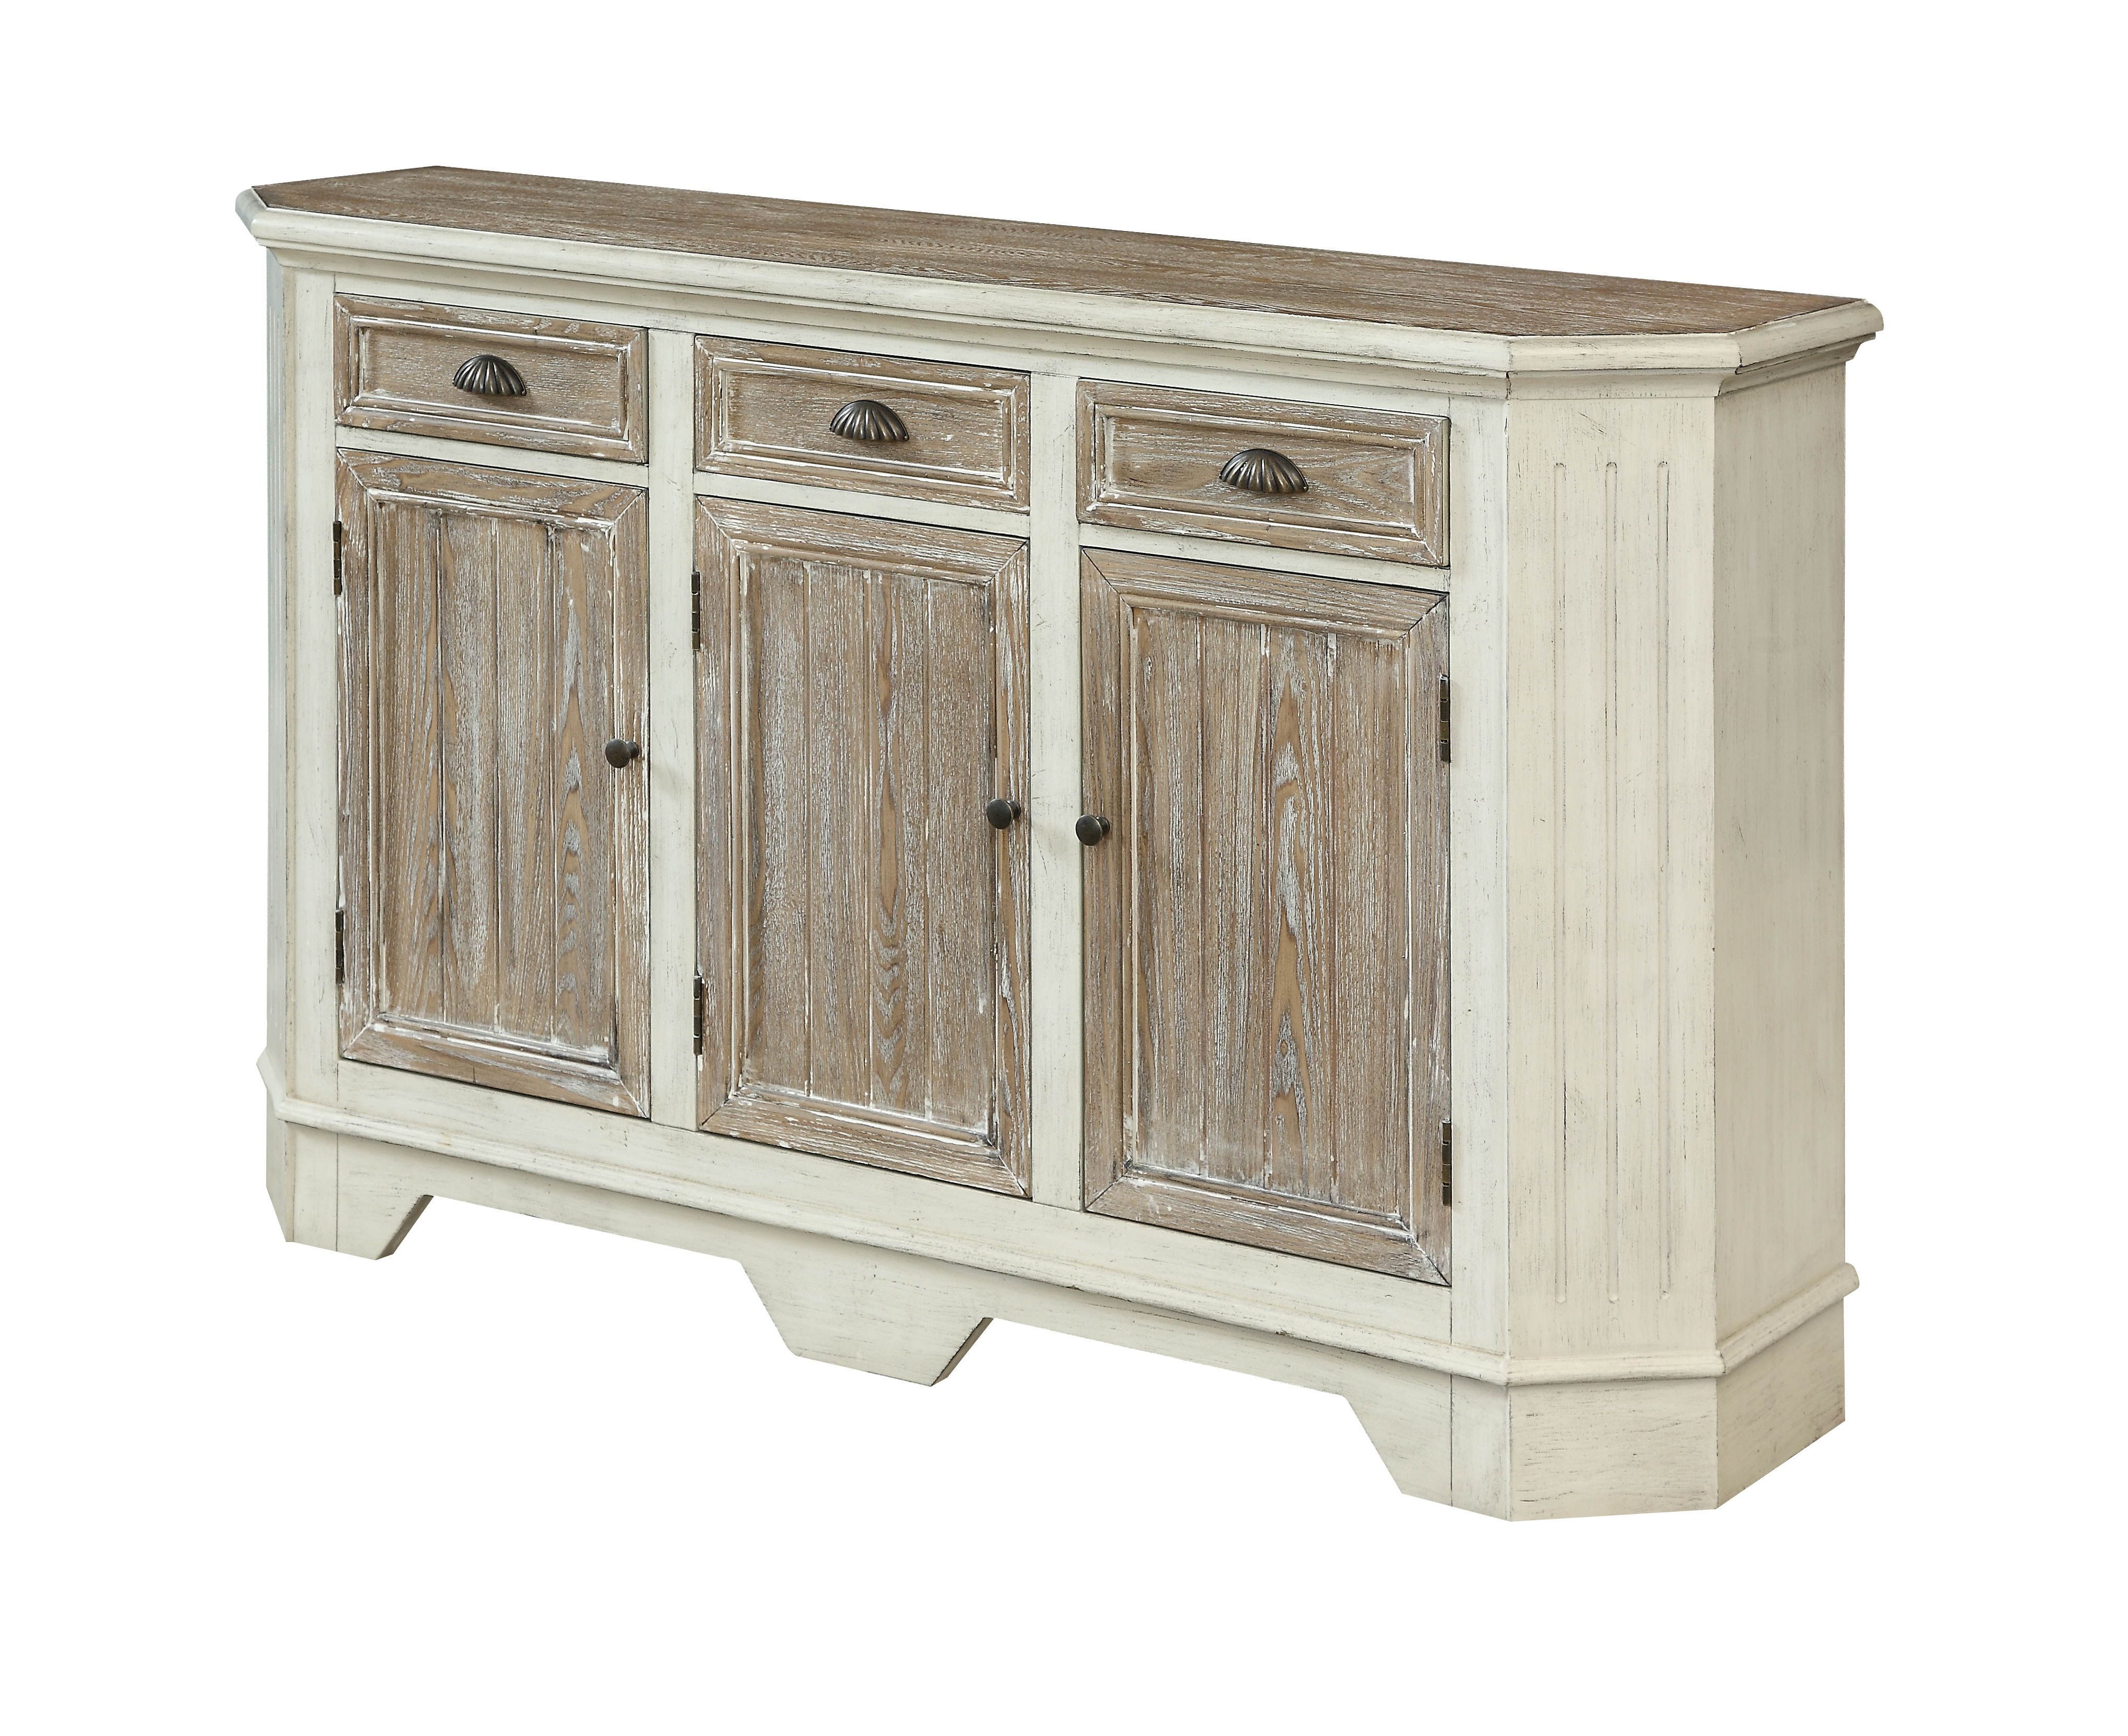 Classy I Winning Home Kitchen Credenza Ideas Wheeland For Amityville Sideboards (View 14 of 20)